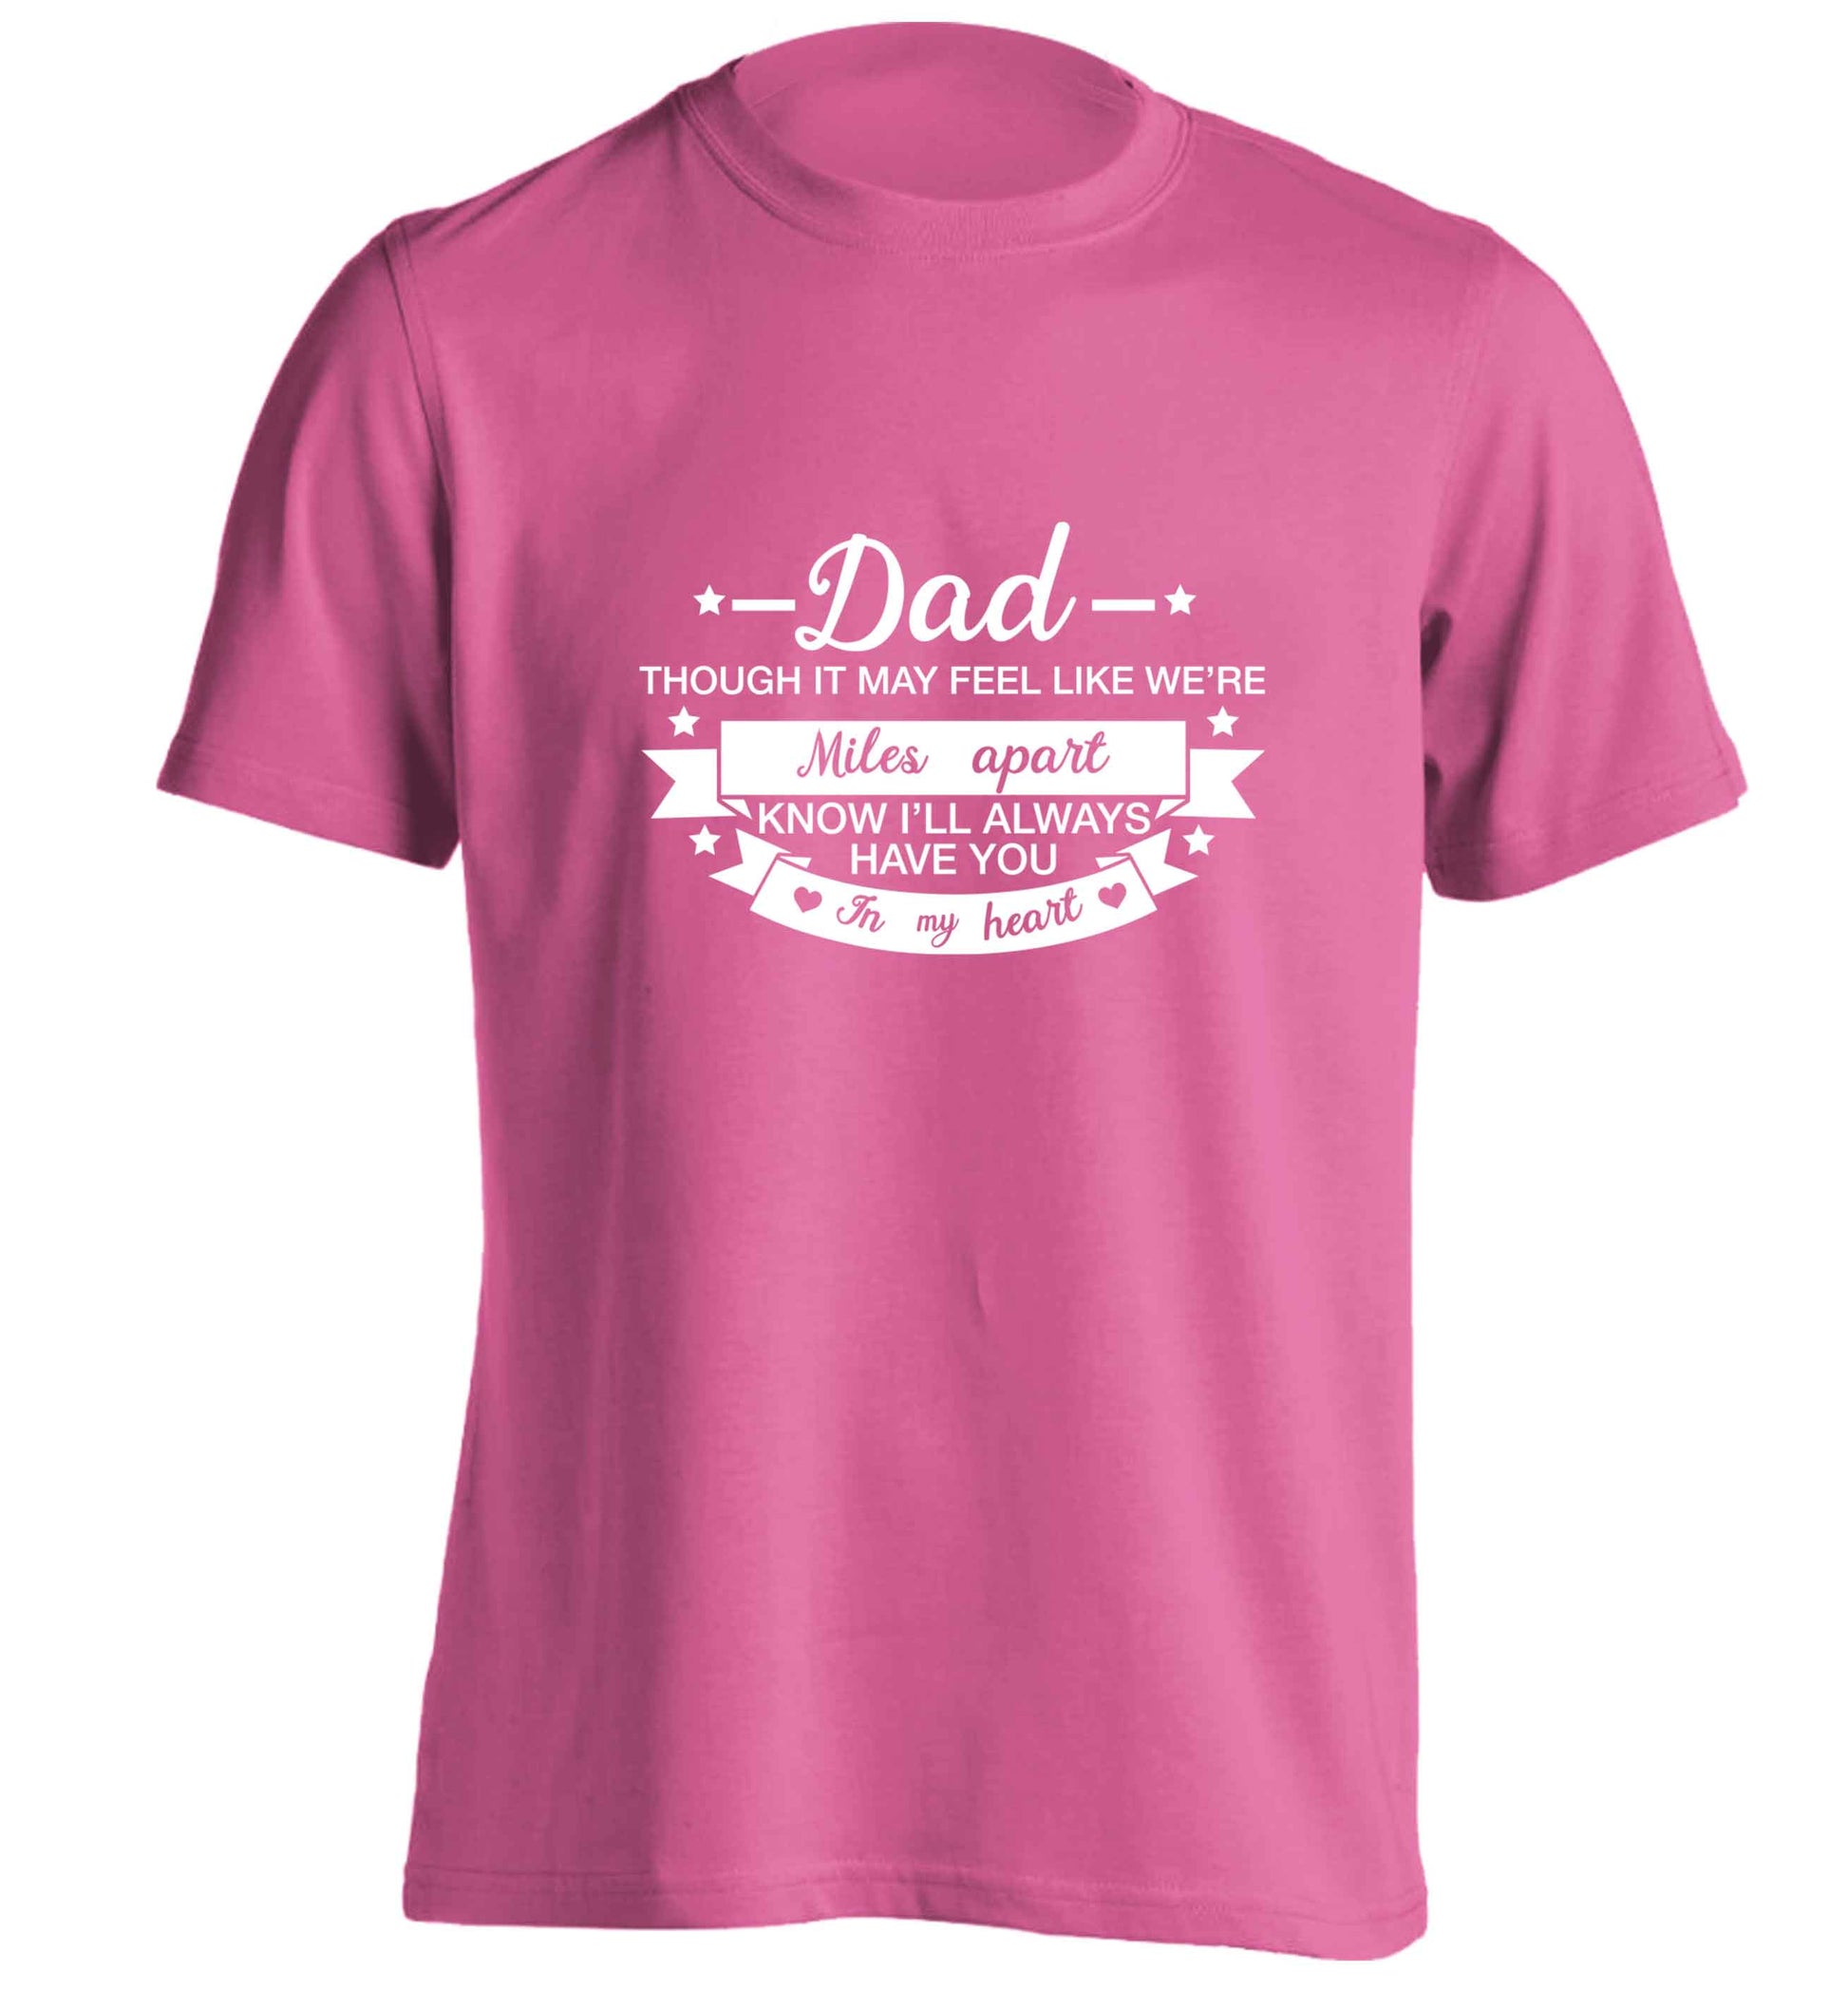 Dad though it may feel like we're miles apart know I'll always have you in my heart adults unisex pink Tshirt 2XL